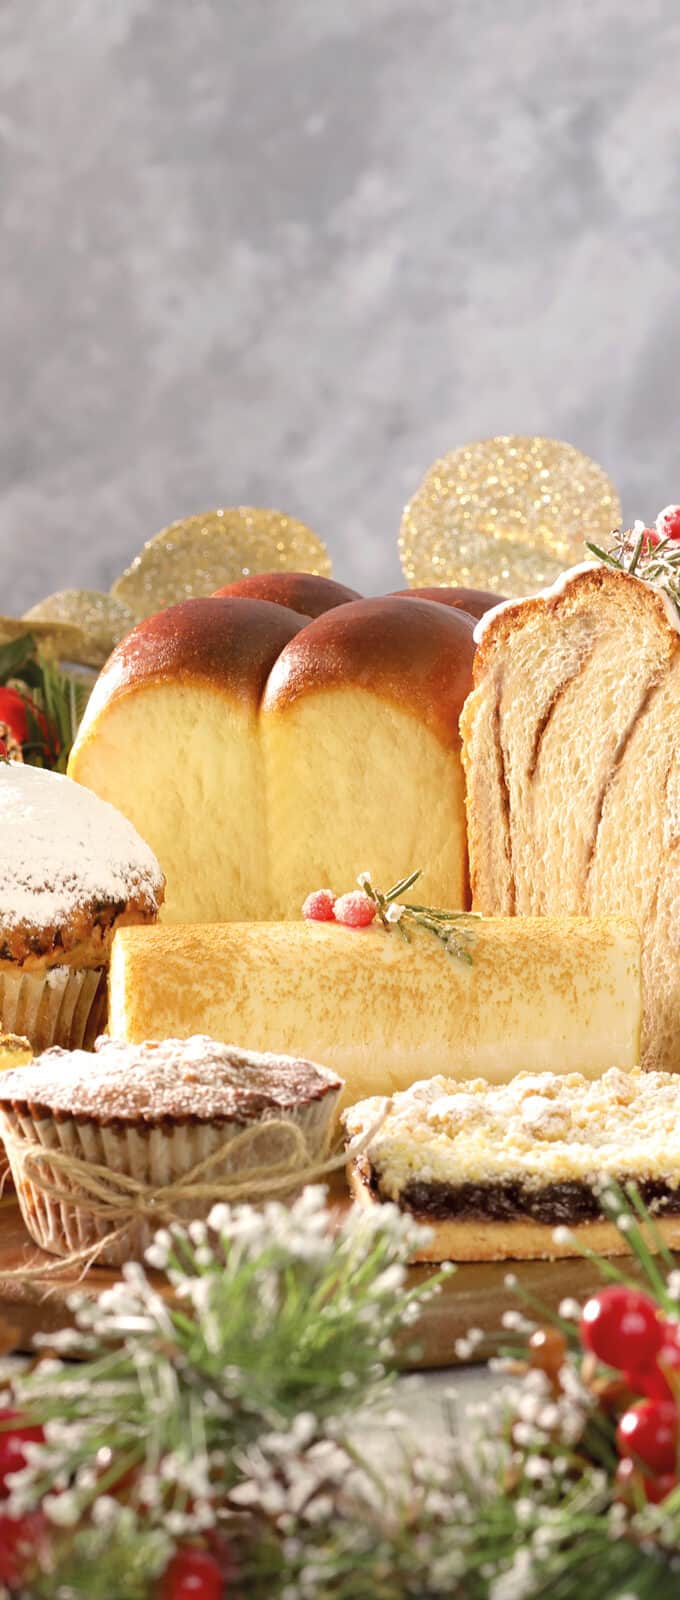 BAKING SUCCESS: A COMPREHENSIVE GUIDE TO PREPARING YOUR BAKERY FOR THE HOLIDAY SEASON 🎄